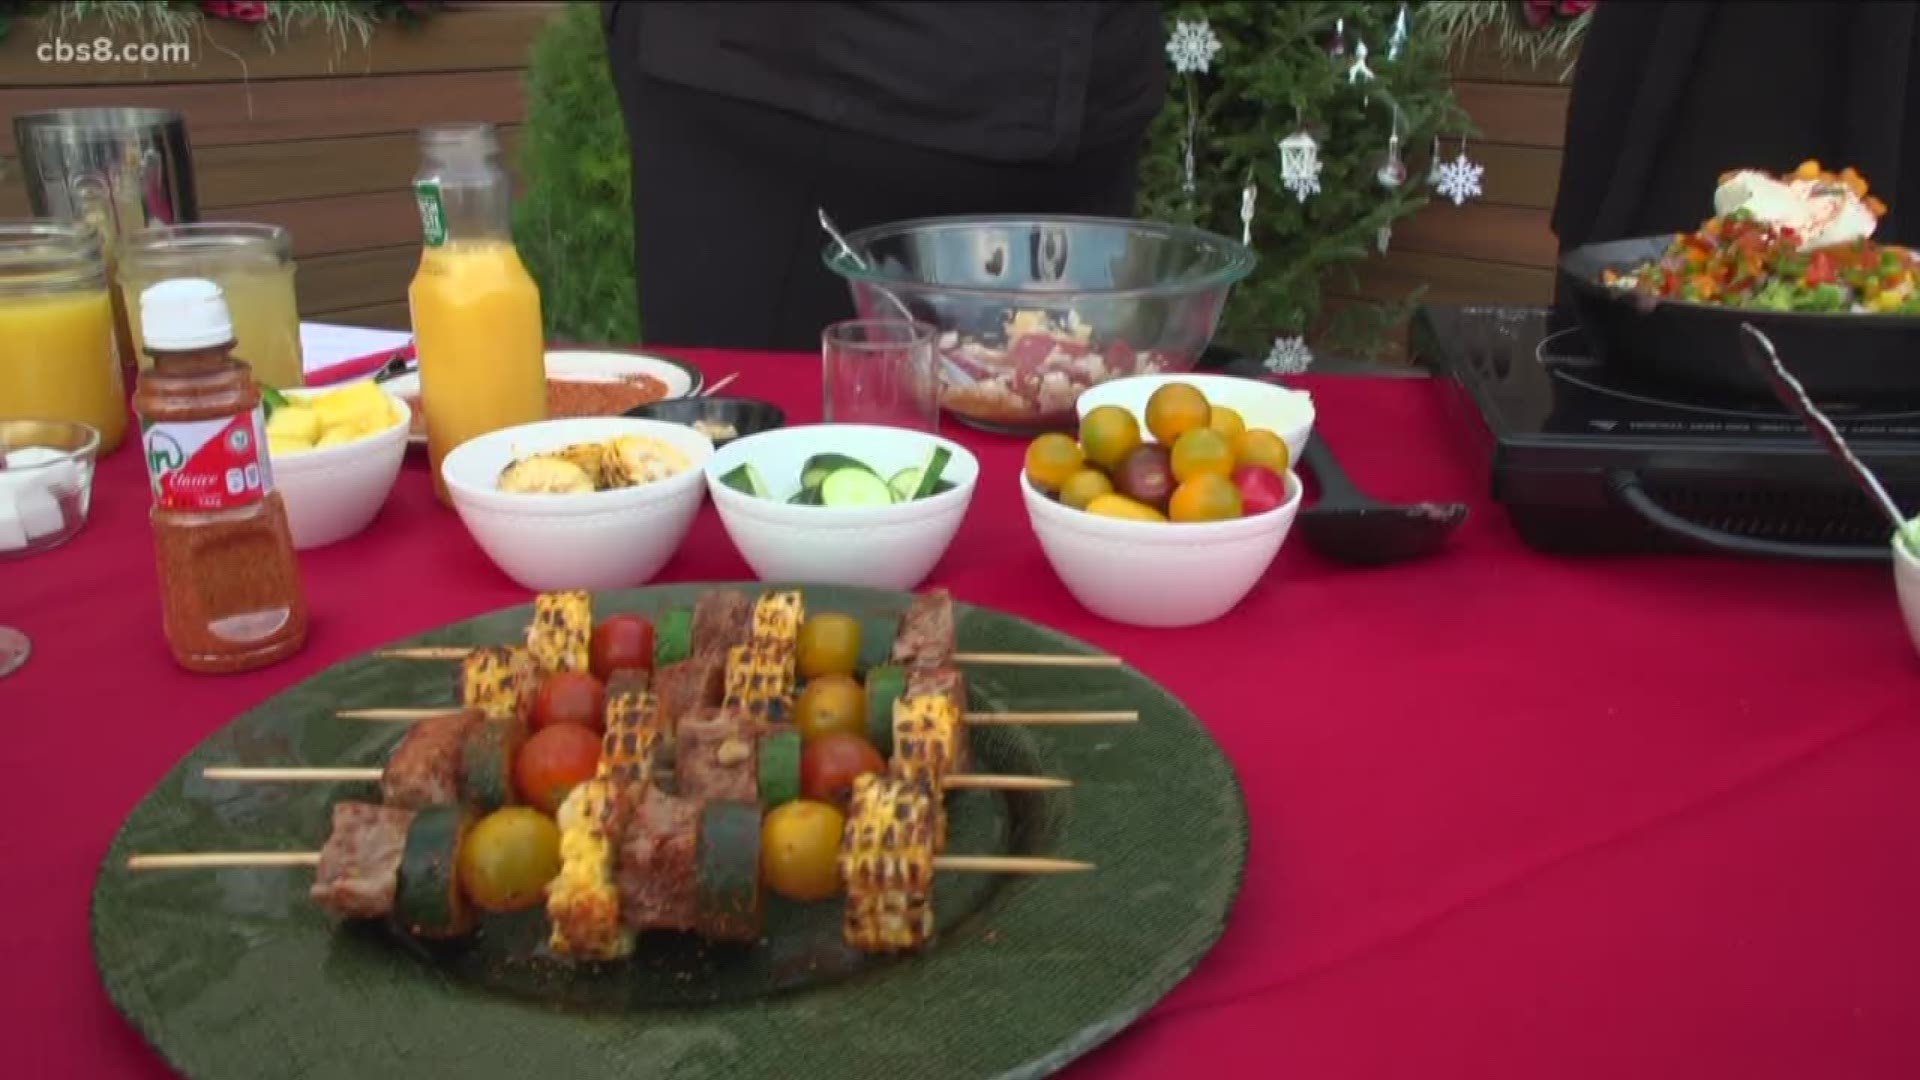 A Food Network superstar has some tasty tips to take your holiday party to the next level.